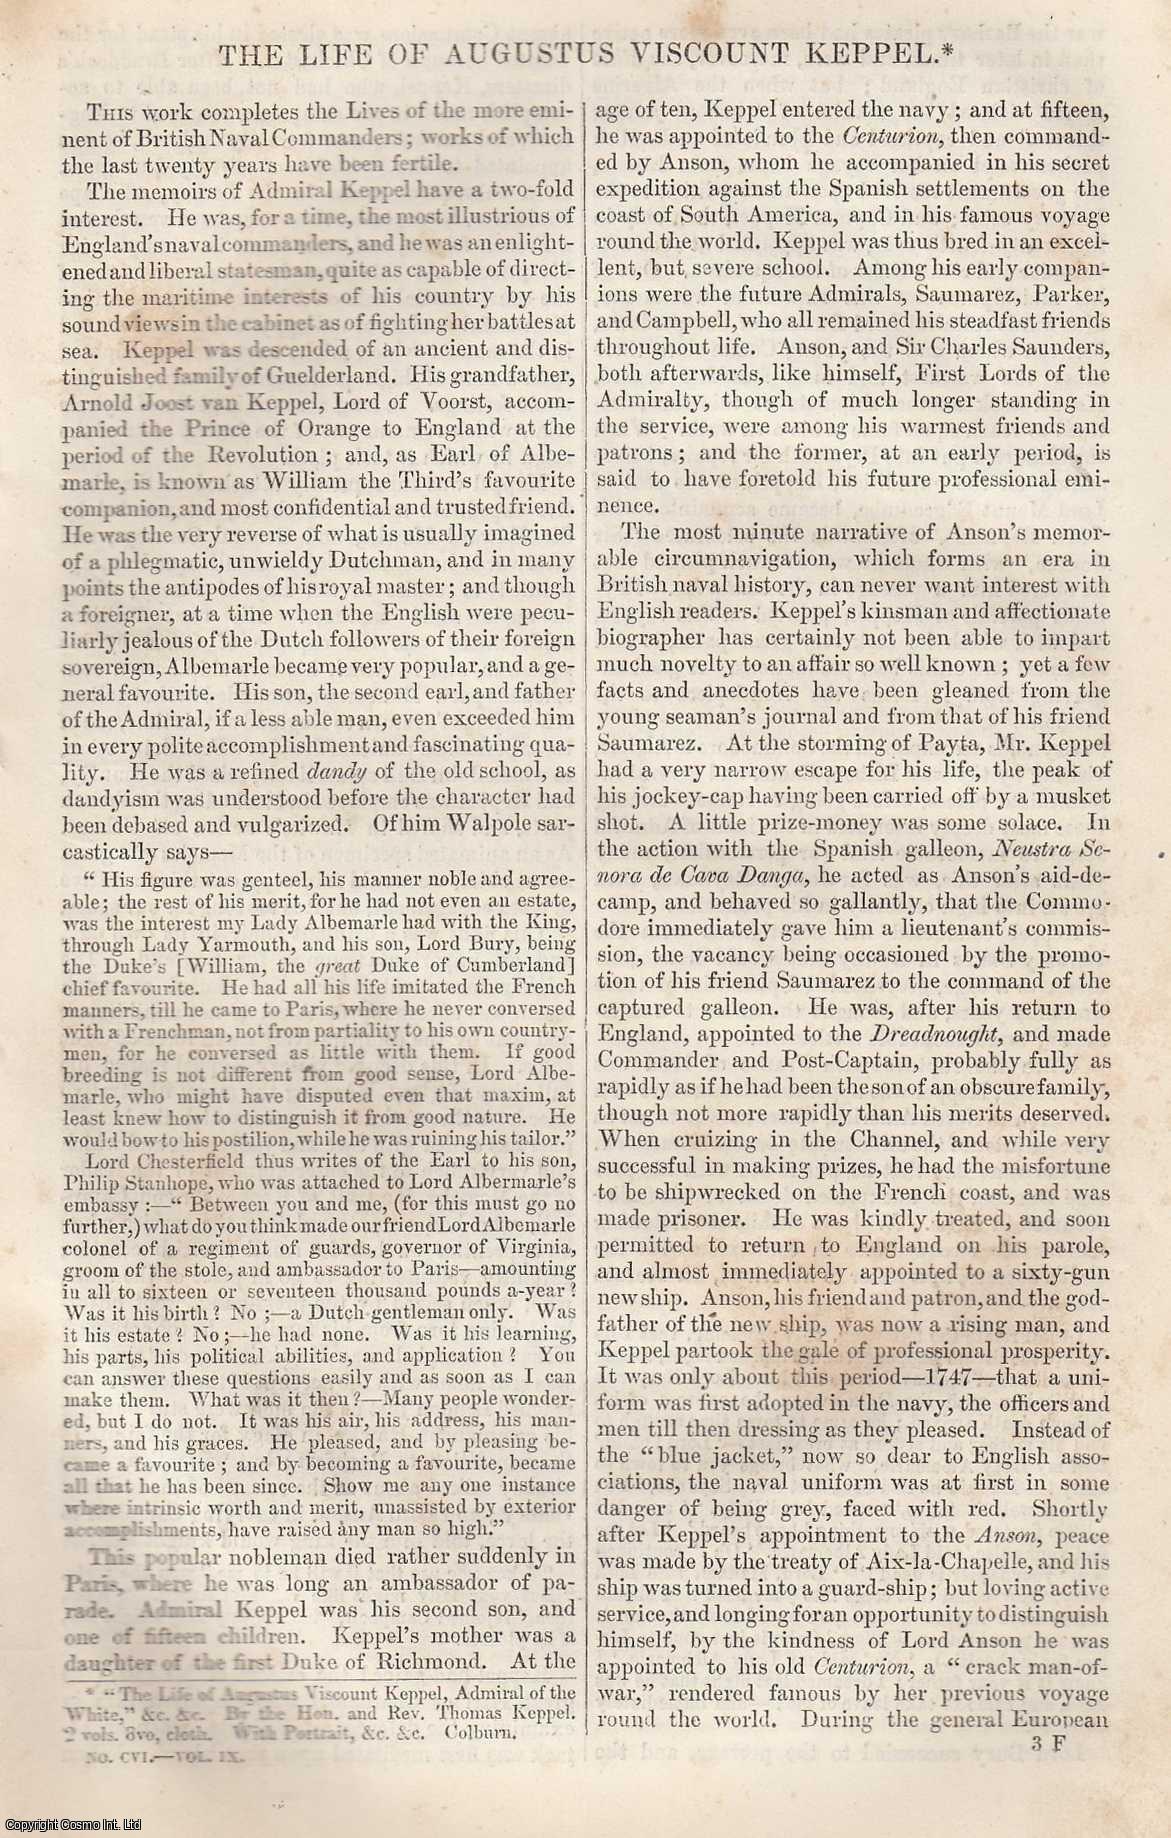 --- - The Life of Augustus Viscount Keppel. An original article from Tait's Edinburgh Magazine, 1842.